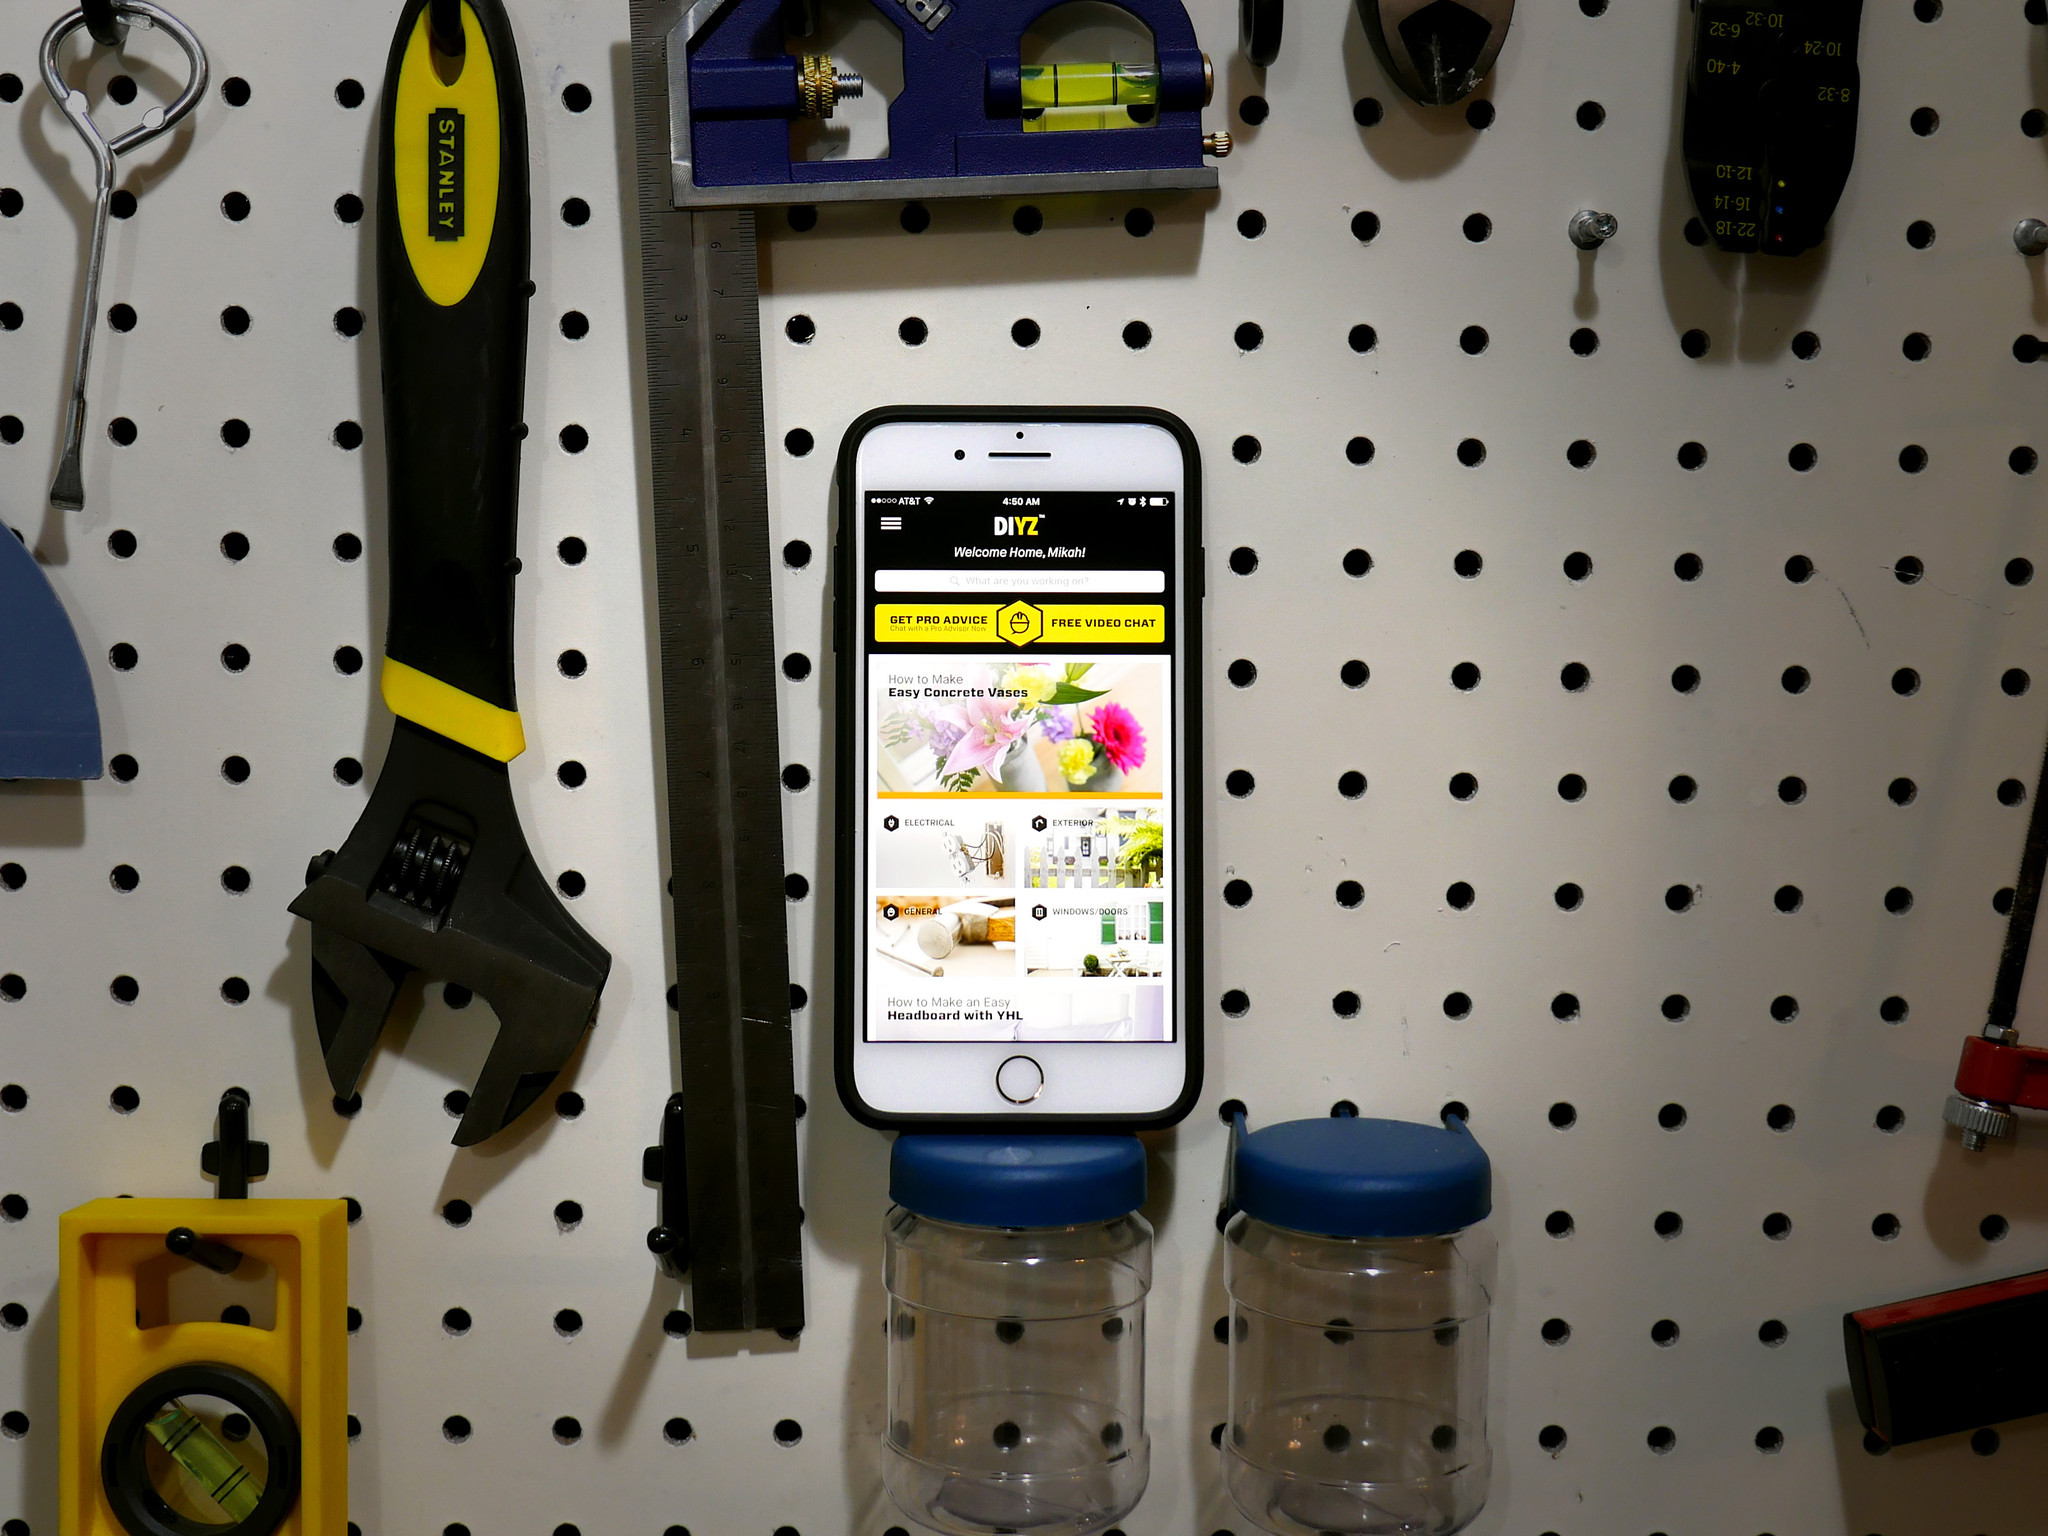 An iPhone is shown beside common household tools. The DIYZ app is launched and open on screen.